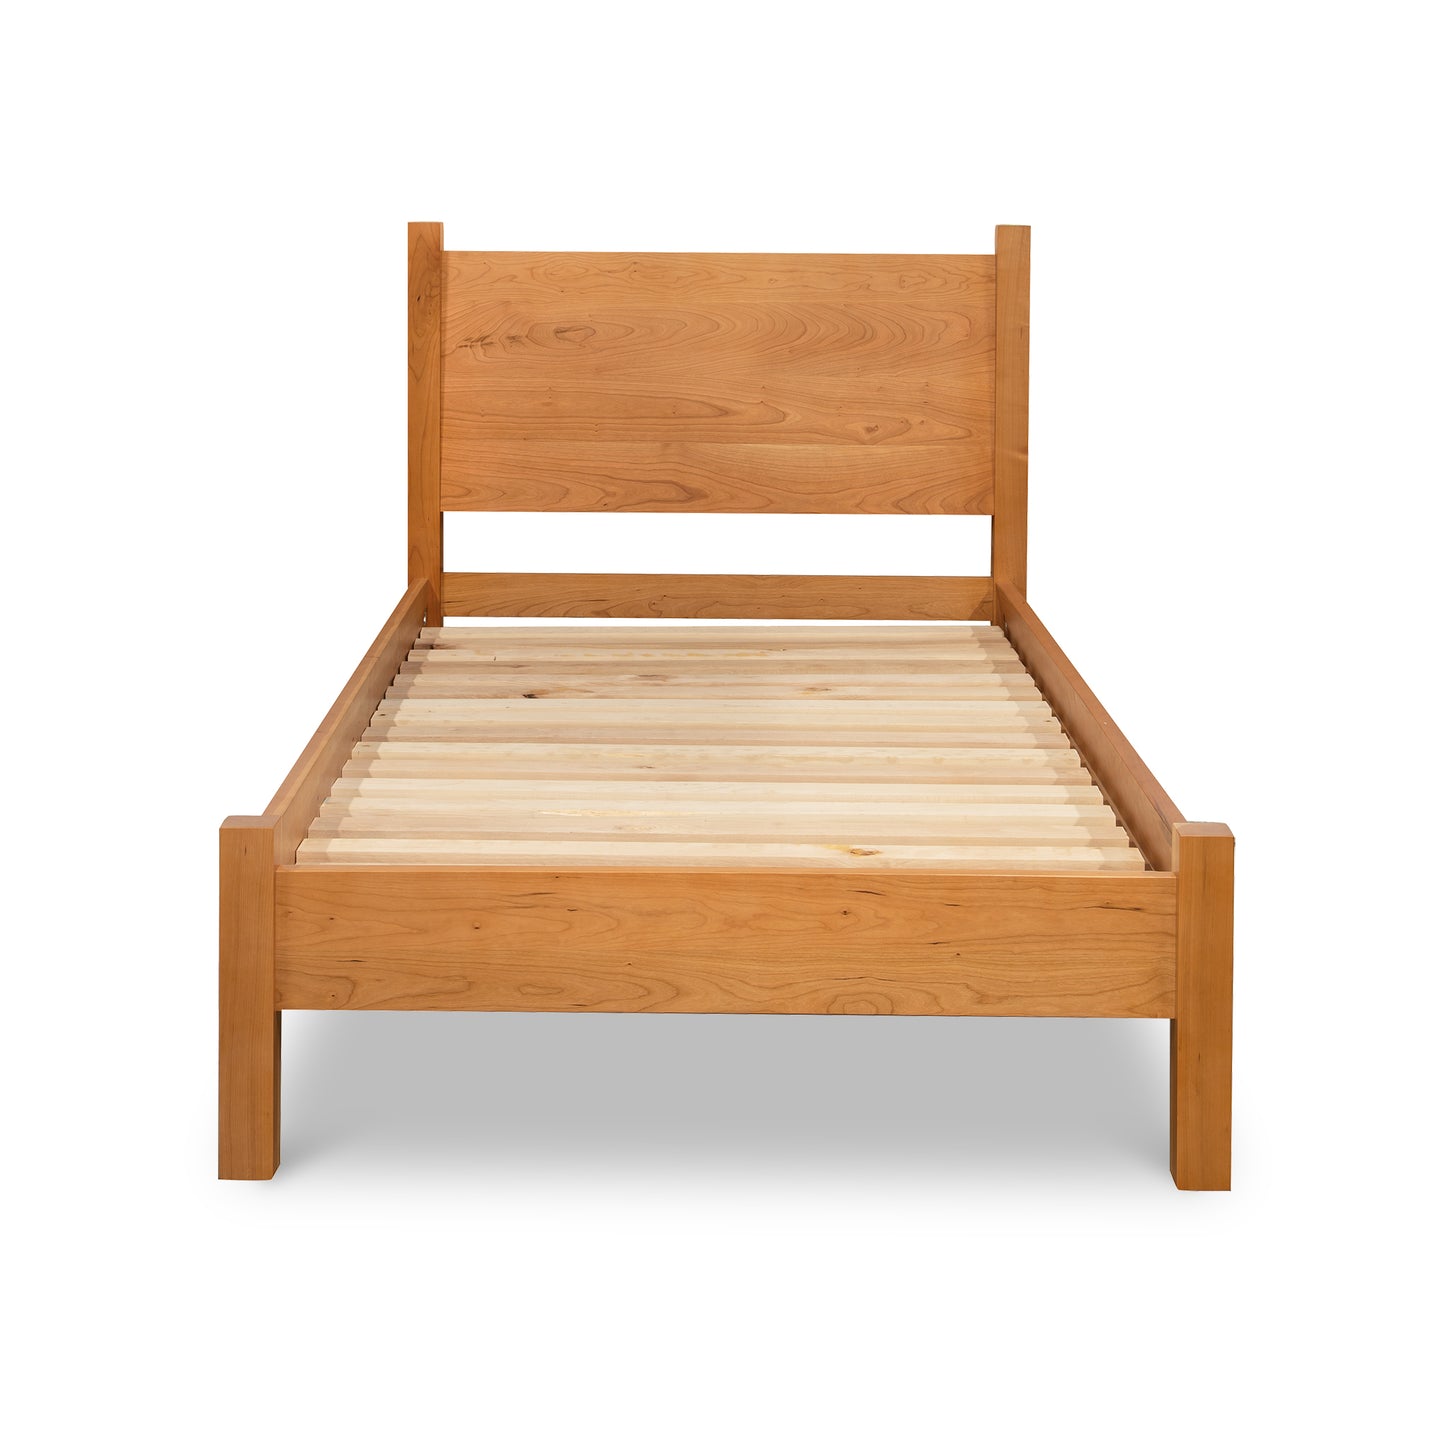 A wooden bed frame with wooden slats.